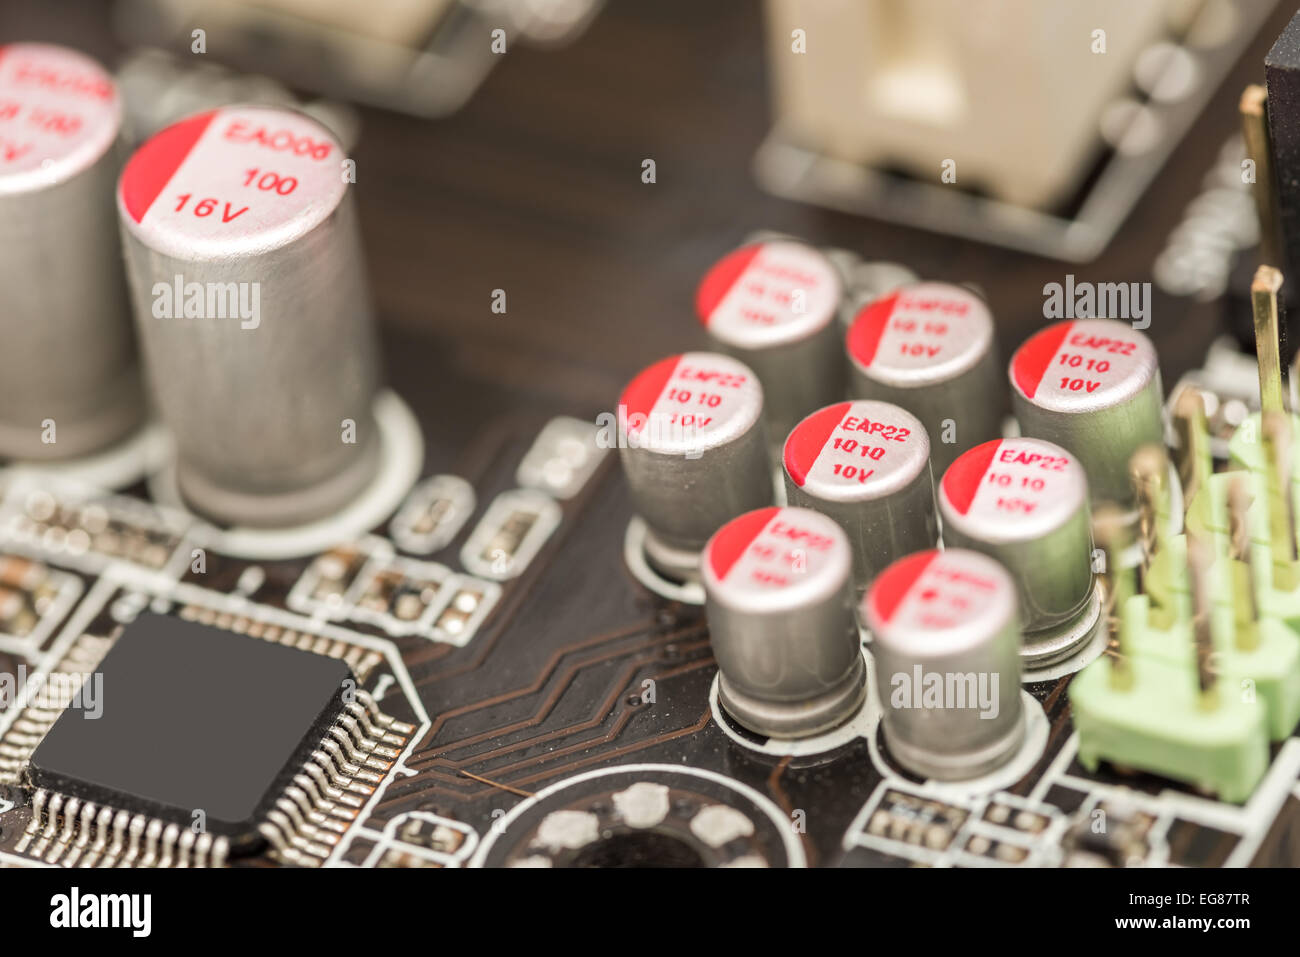 Computer Chip Capacitors And Resistors On Motherboard Stock Photo